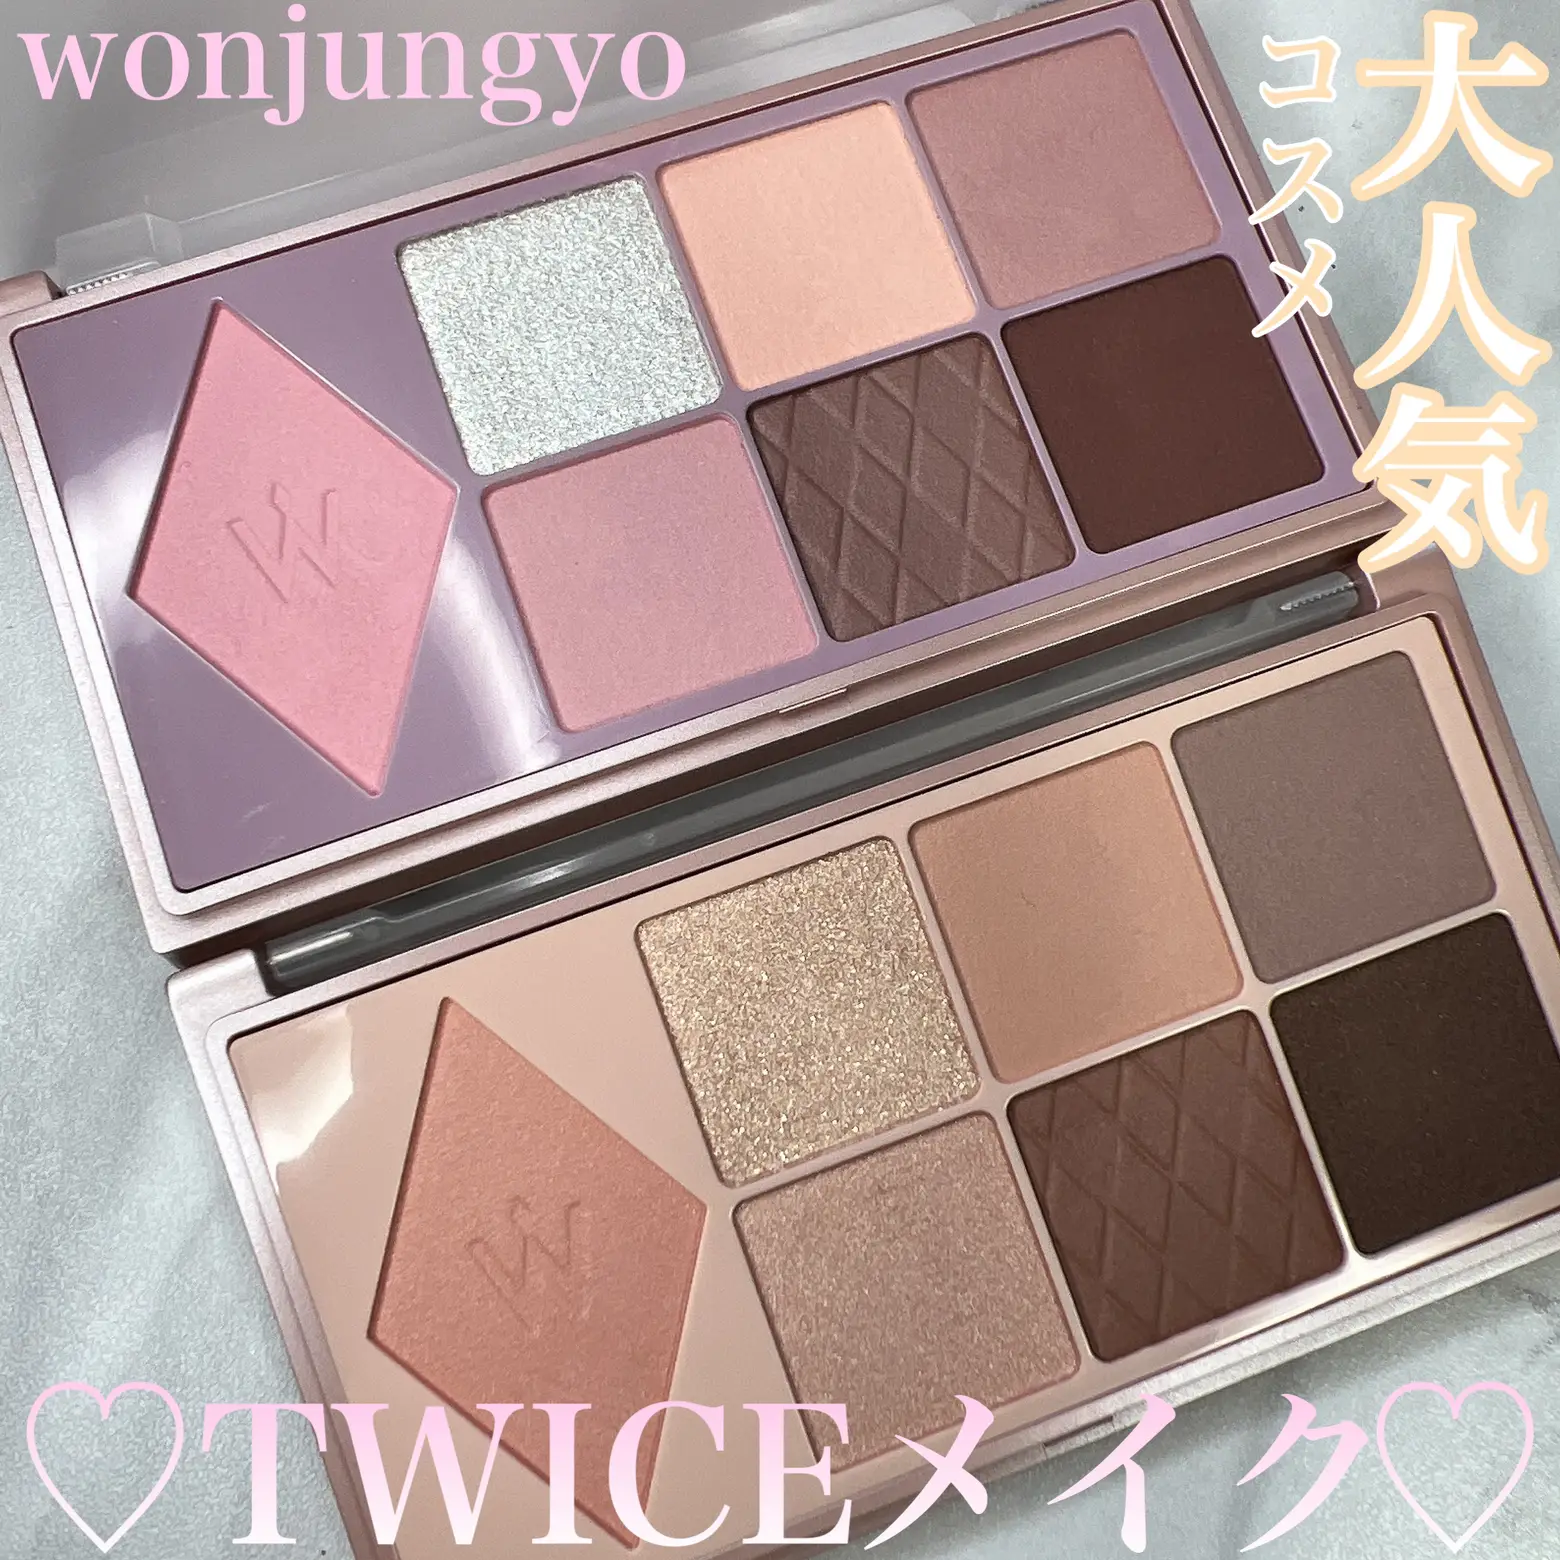 Review✨ Gallery W posted Daily Mood Lemon8 | wonjungyo | Ran♡ Palette Up by